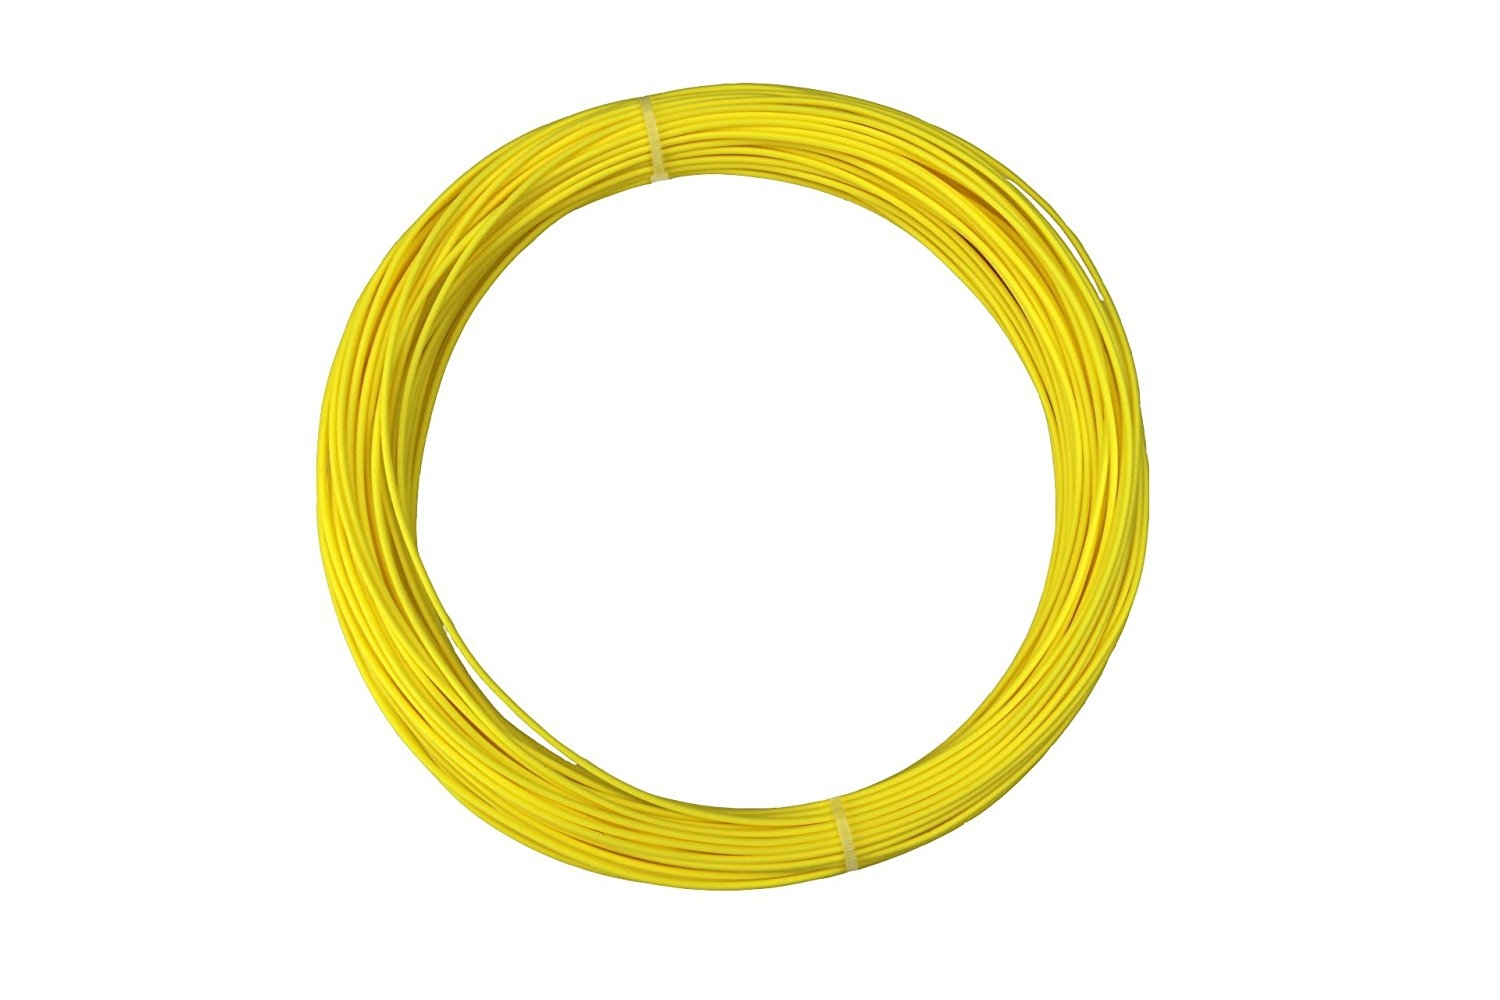 Algix 3D  Clever Yellow  APLA 1.75 mm 100g